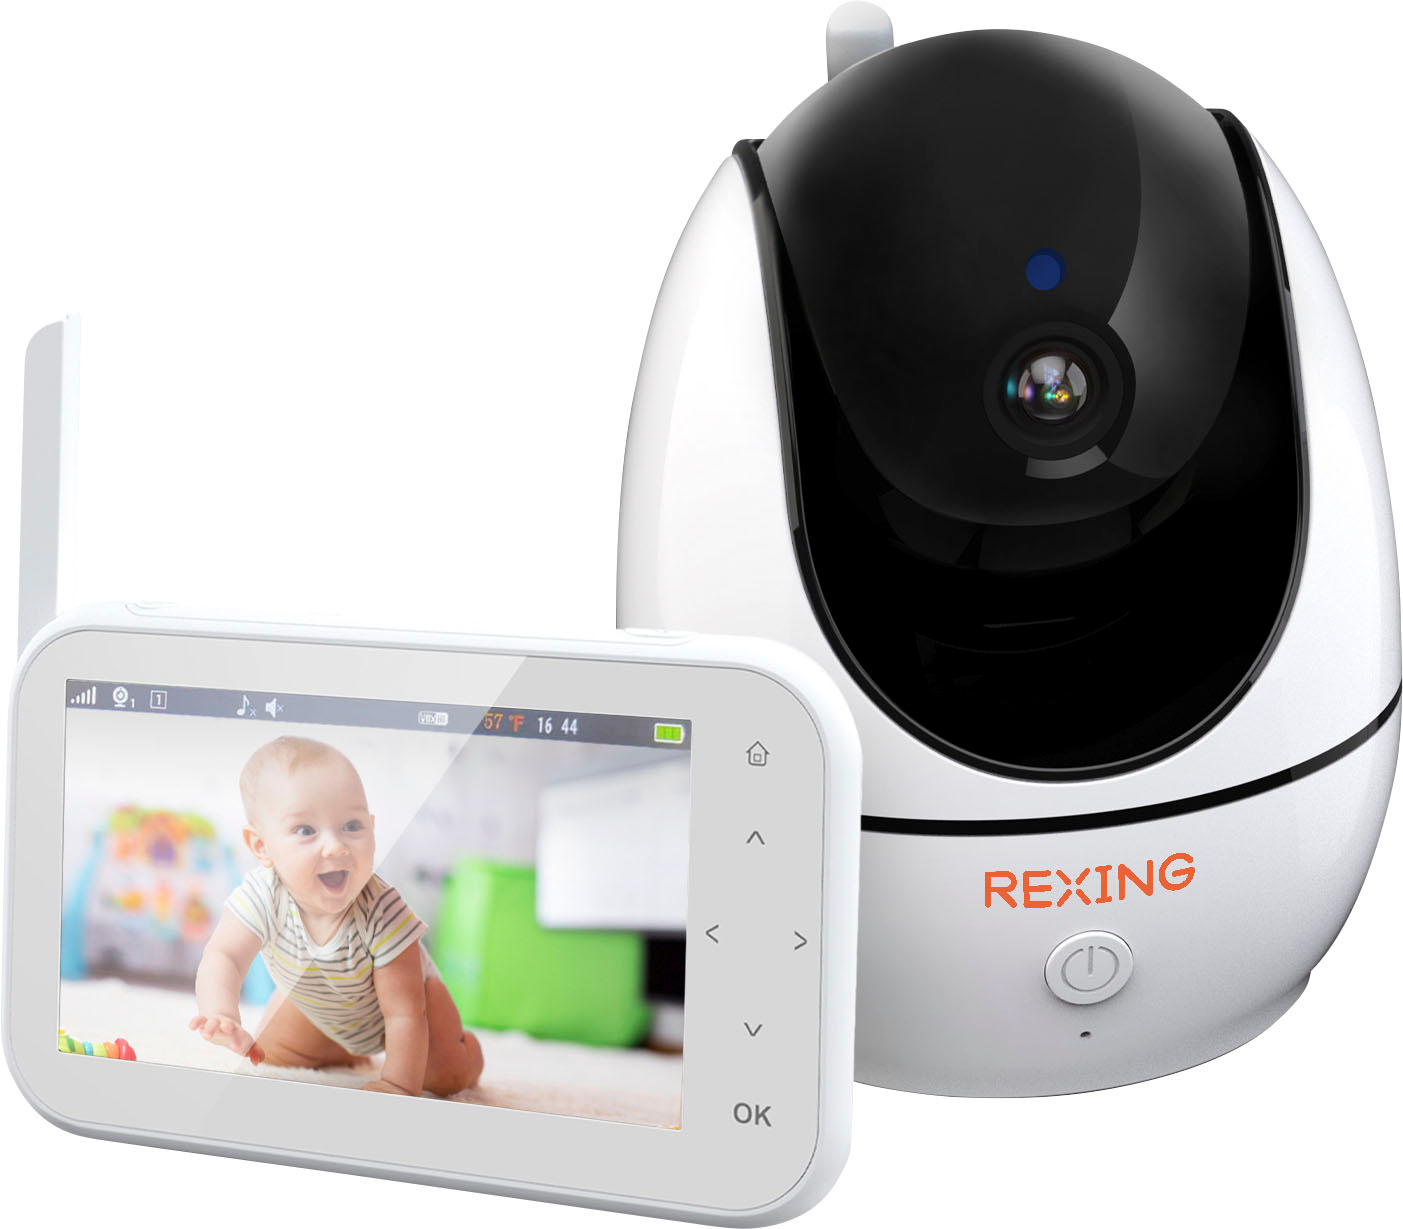 4.5'' Rexing Video Baby Monitor w/ Night Vision & Two-way Talking $50 + Free Shipping